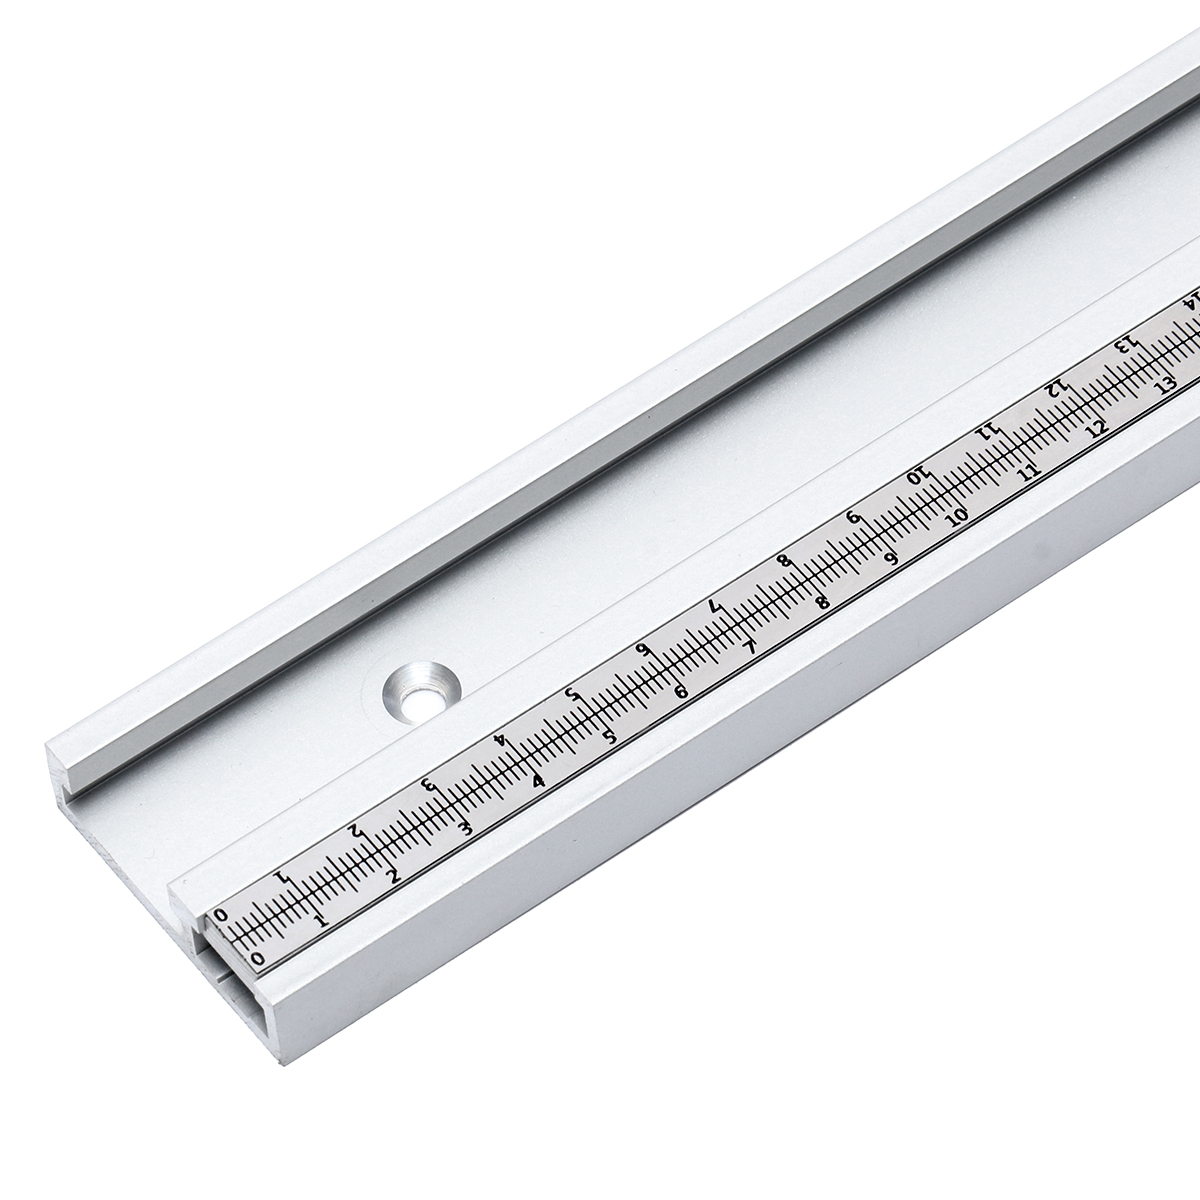 400-1220mm-Aluminum-Alloy-T-Track-T-slot-Miter-Track-with-Slide-Metric-Ruler-Scale-for-Table-Saw-Rou-1462377-1